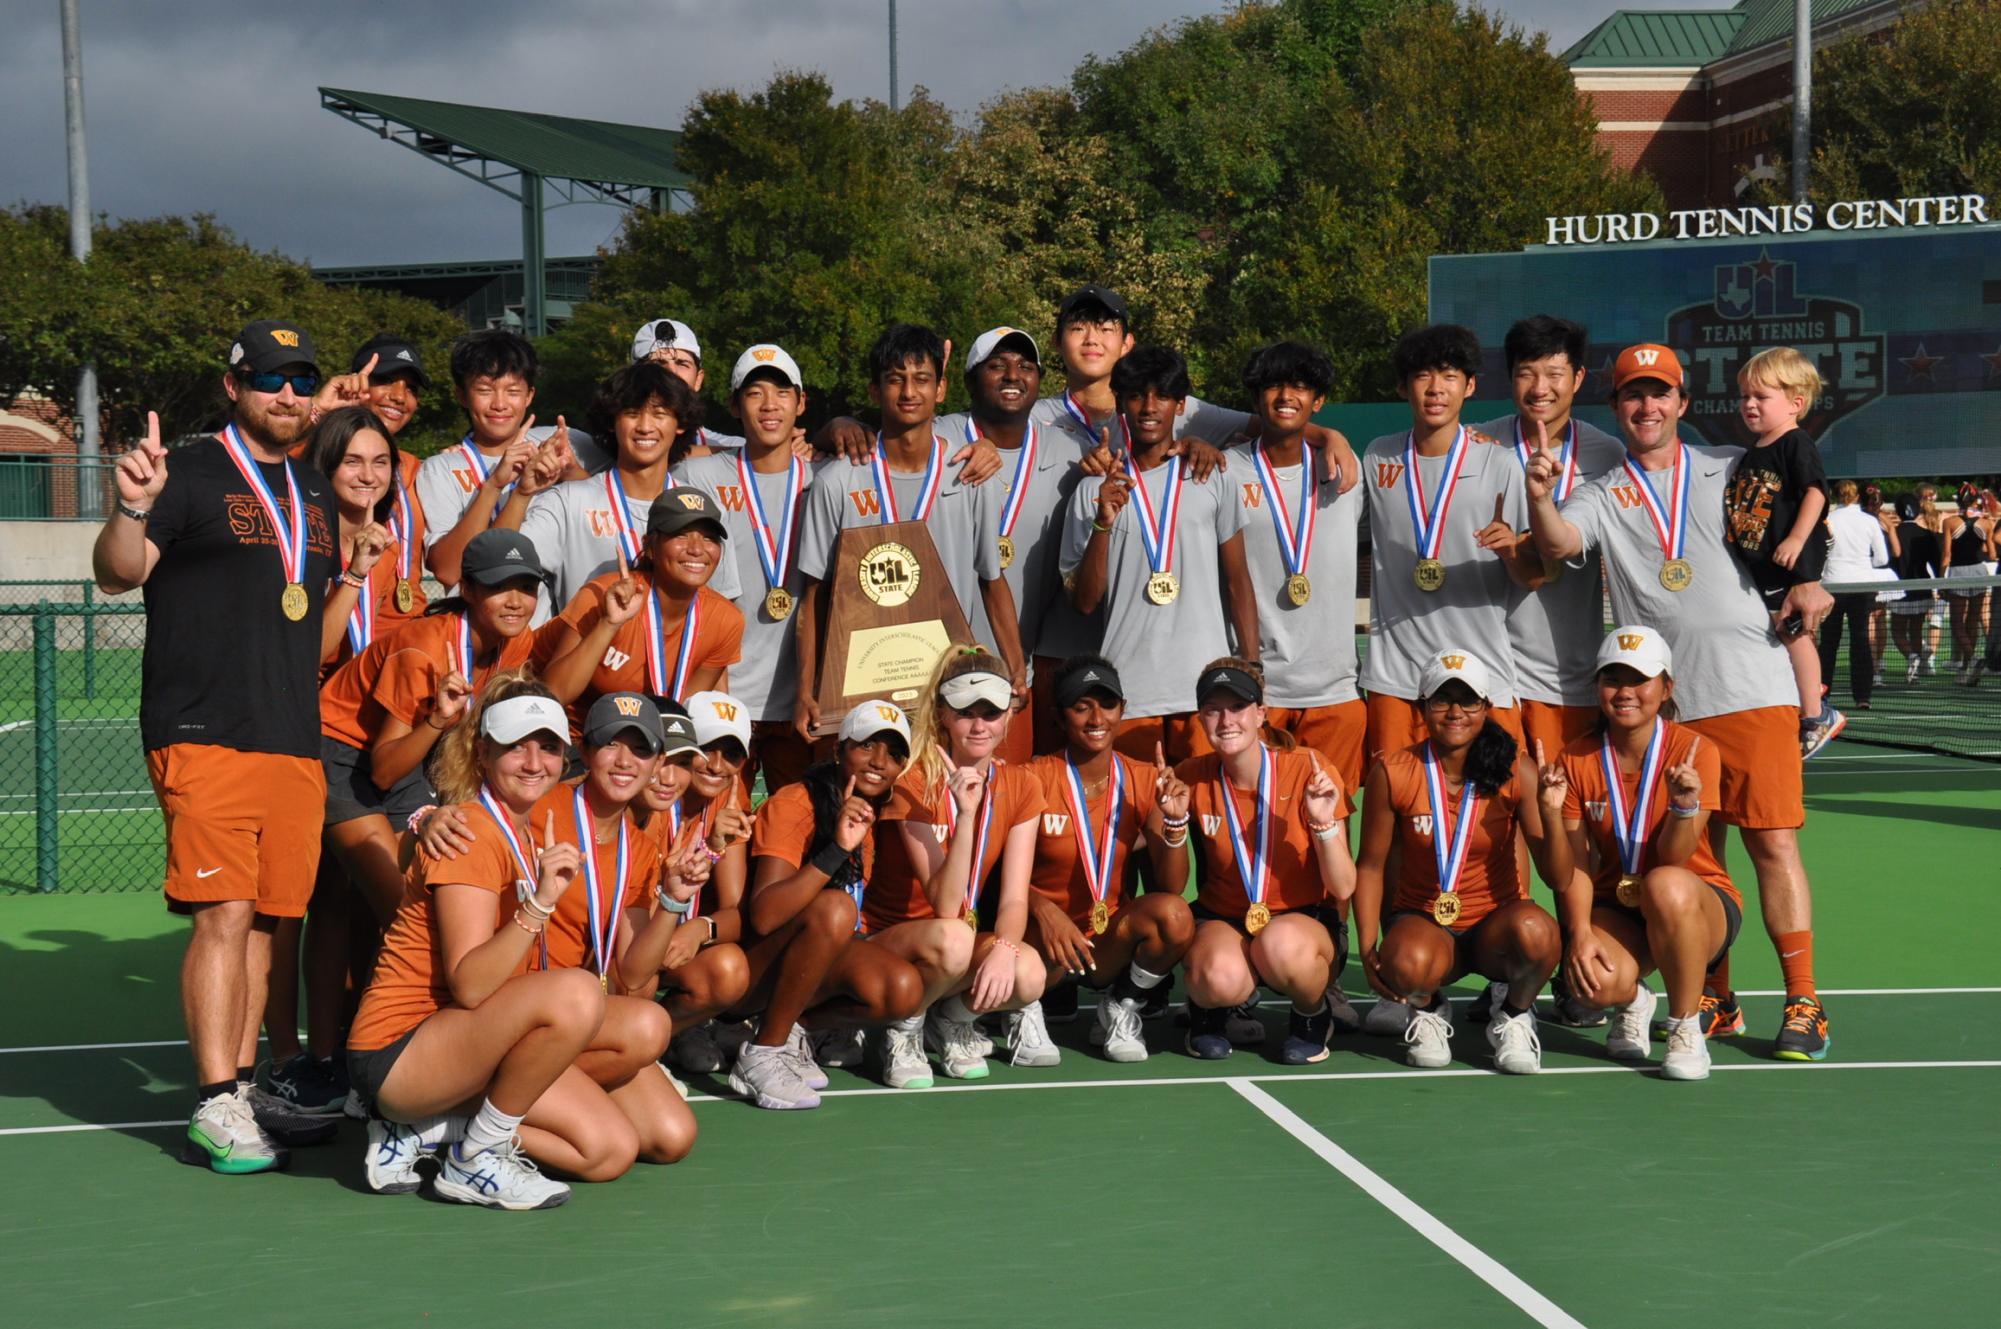 Posing for a photo with their State Championship trophy, the varsity tennis team celebrates victory after a 10-3 win against Houston Memorial Mustangs. This year marks the first time the team has won the title two years in a row. Players attributed the win to dedication, practice, and community.